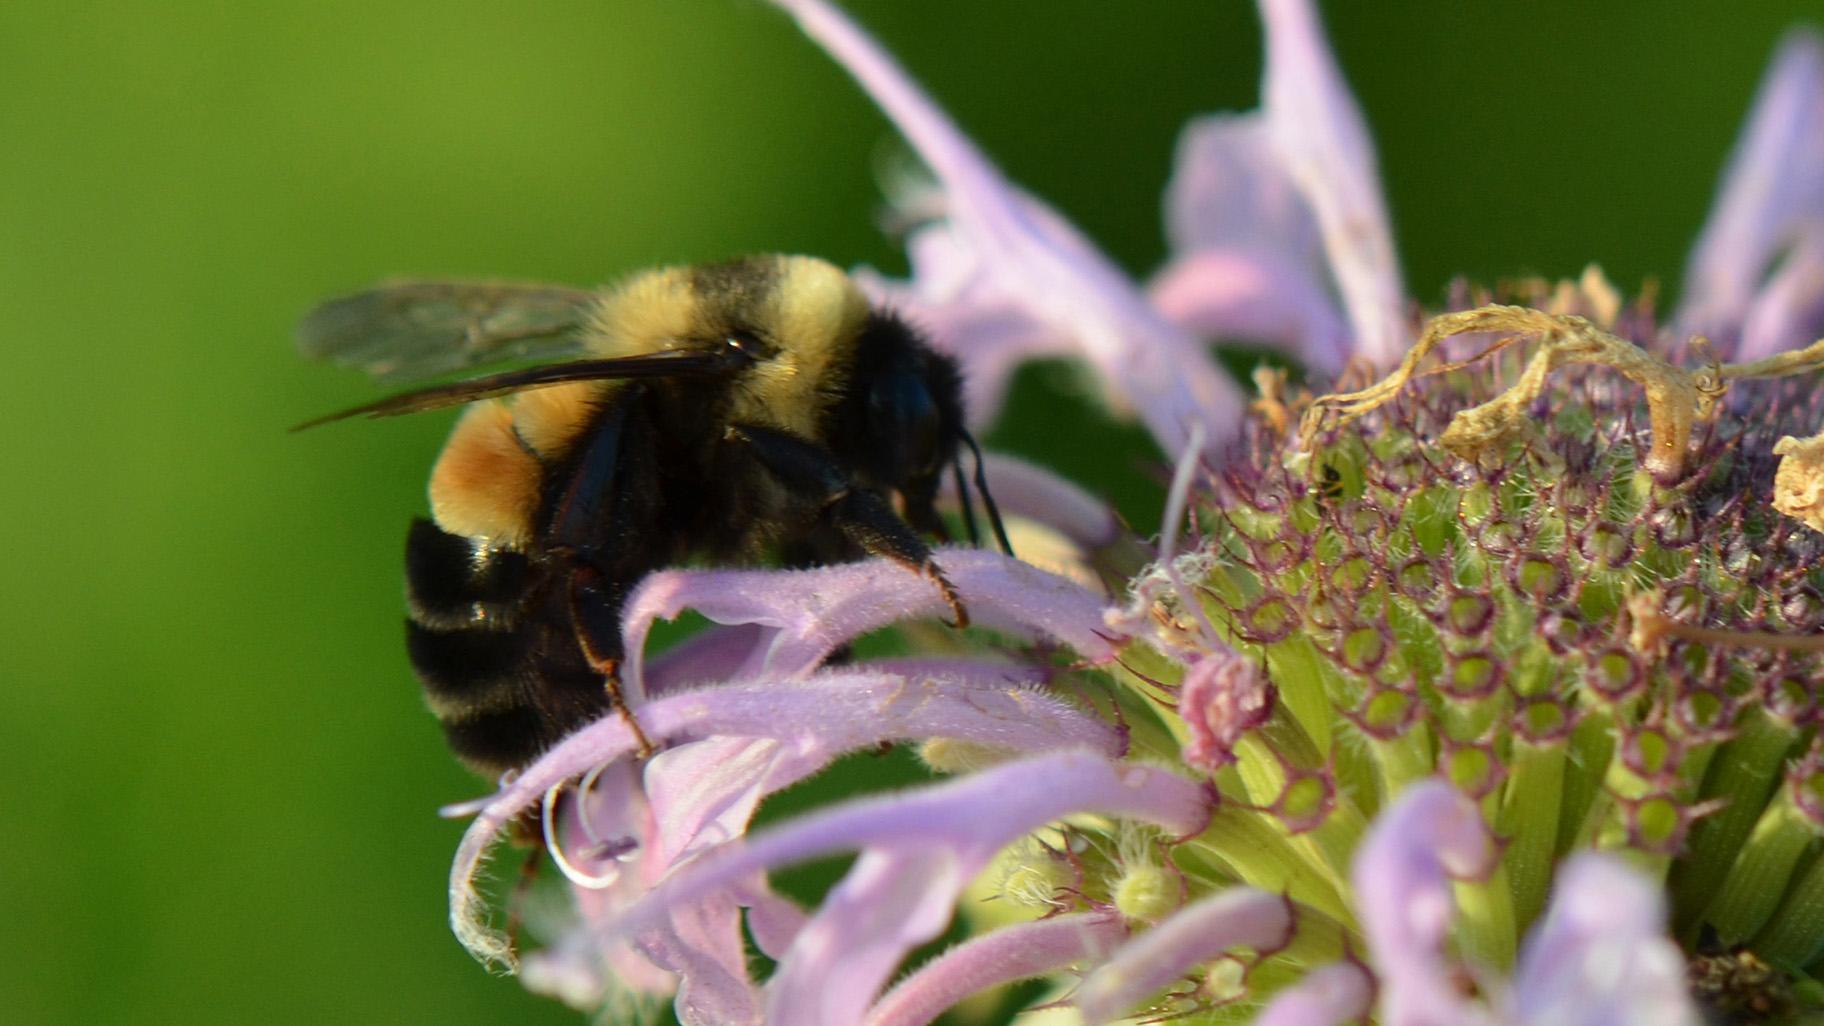 The rusty patched bumble bee, pictured here, was the first bee in the continental U.S. to receive an endangered species listing. More bumble bees are now being considered. (Courtesy U.S. Fish and Wildlife Service)